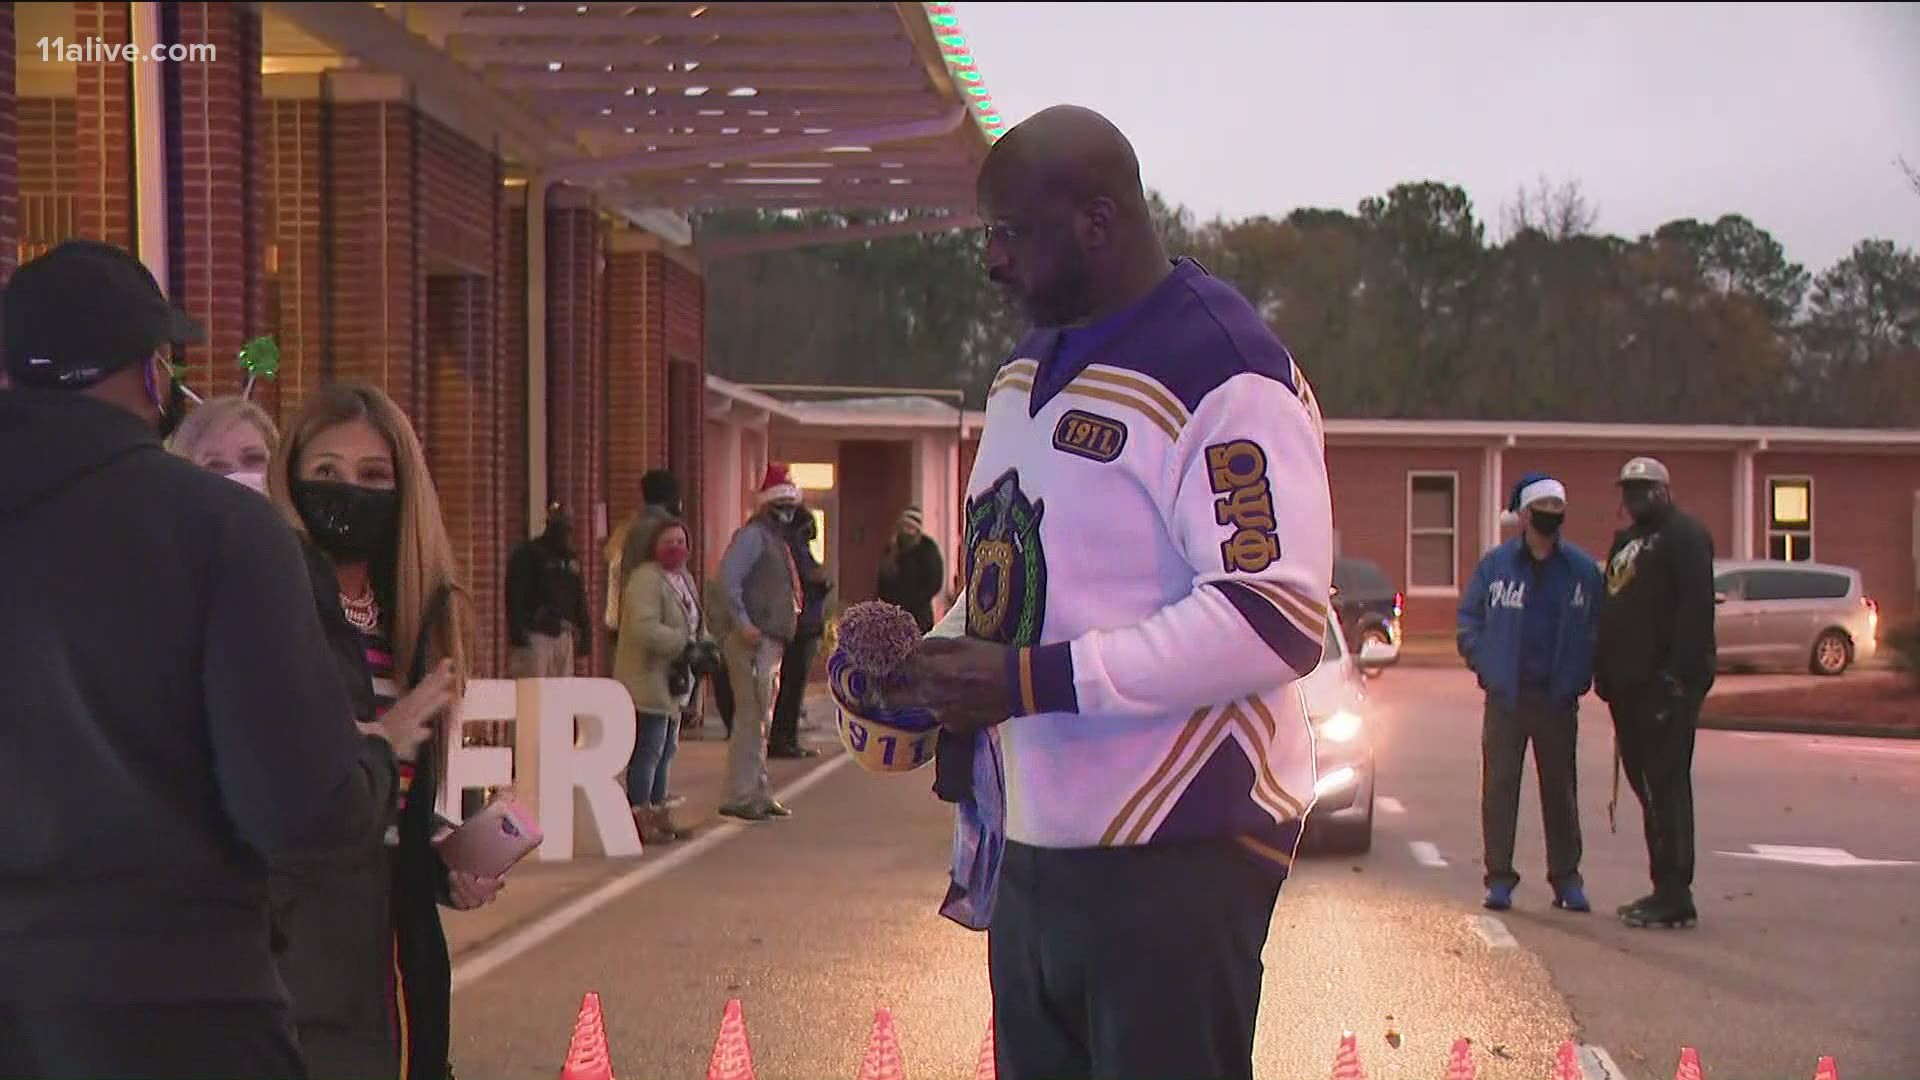 It is Shaq's 19th year hosting the Shaqaclause event.